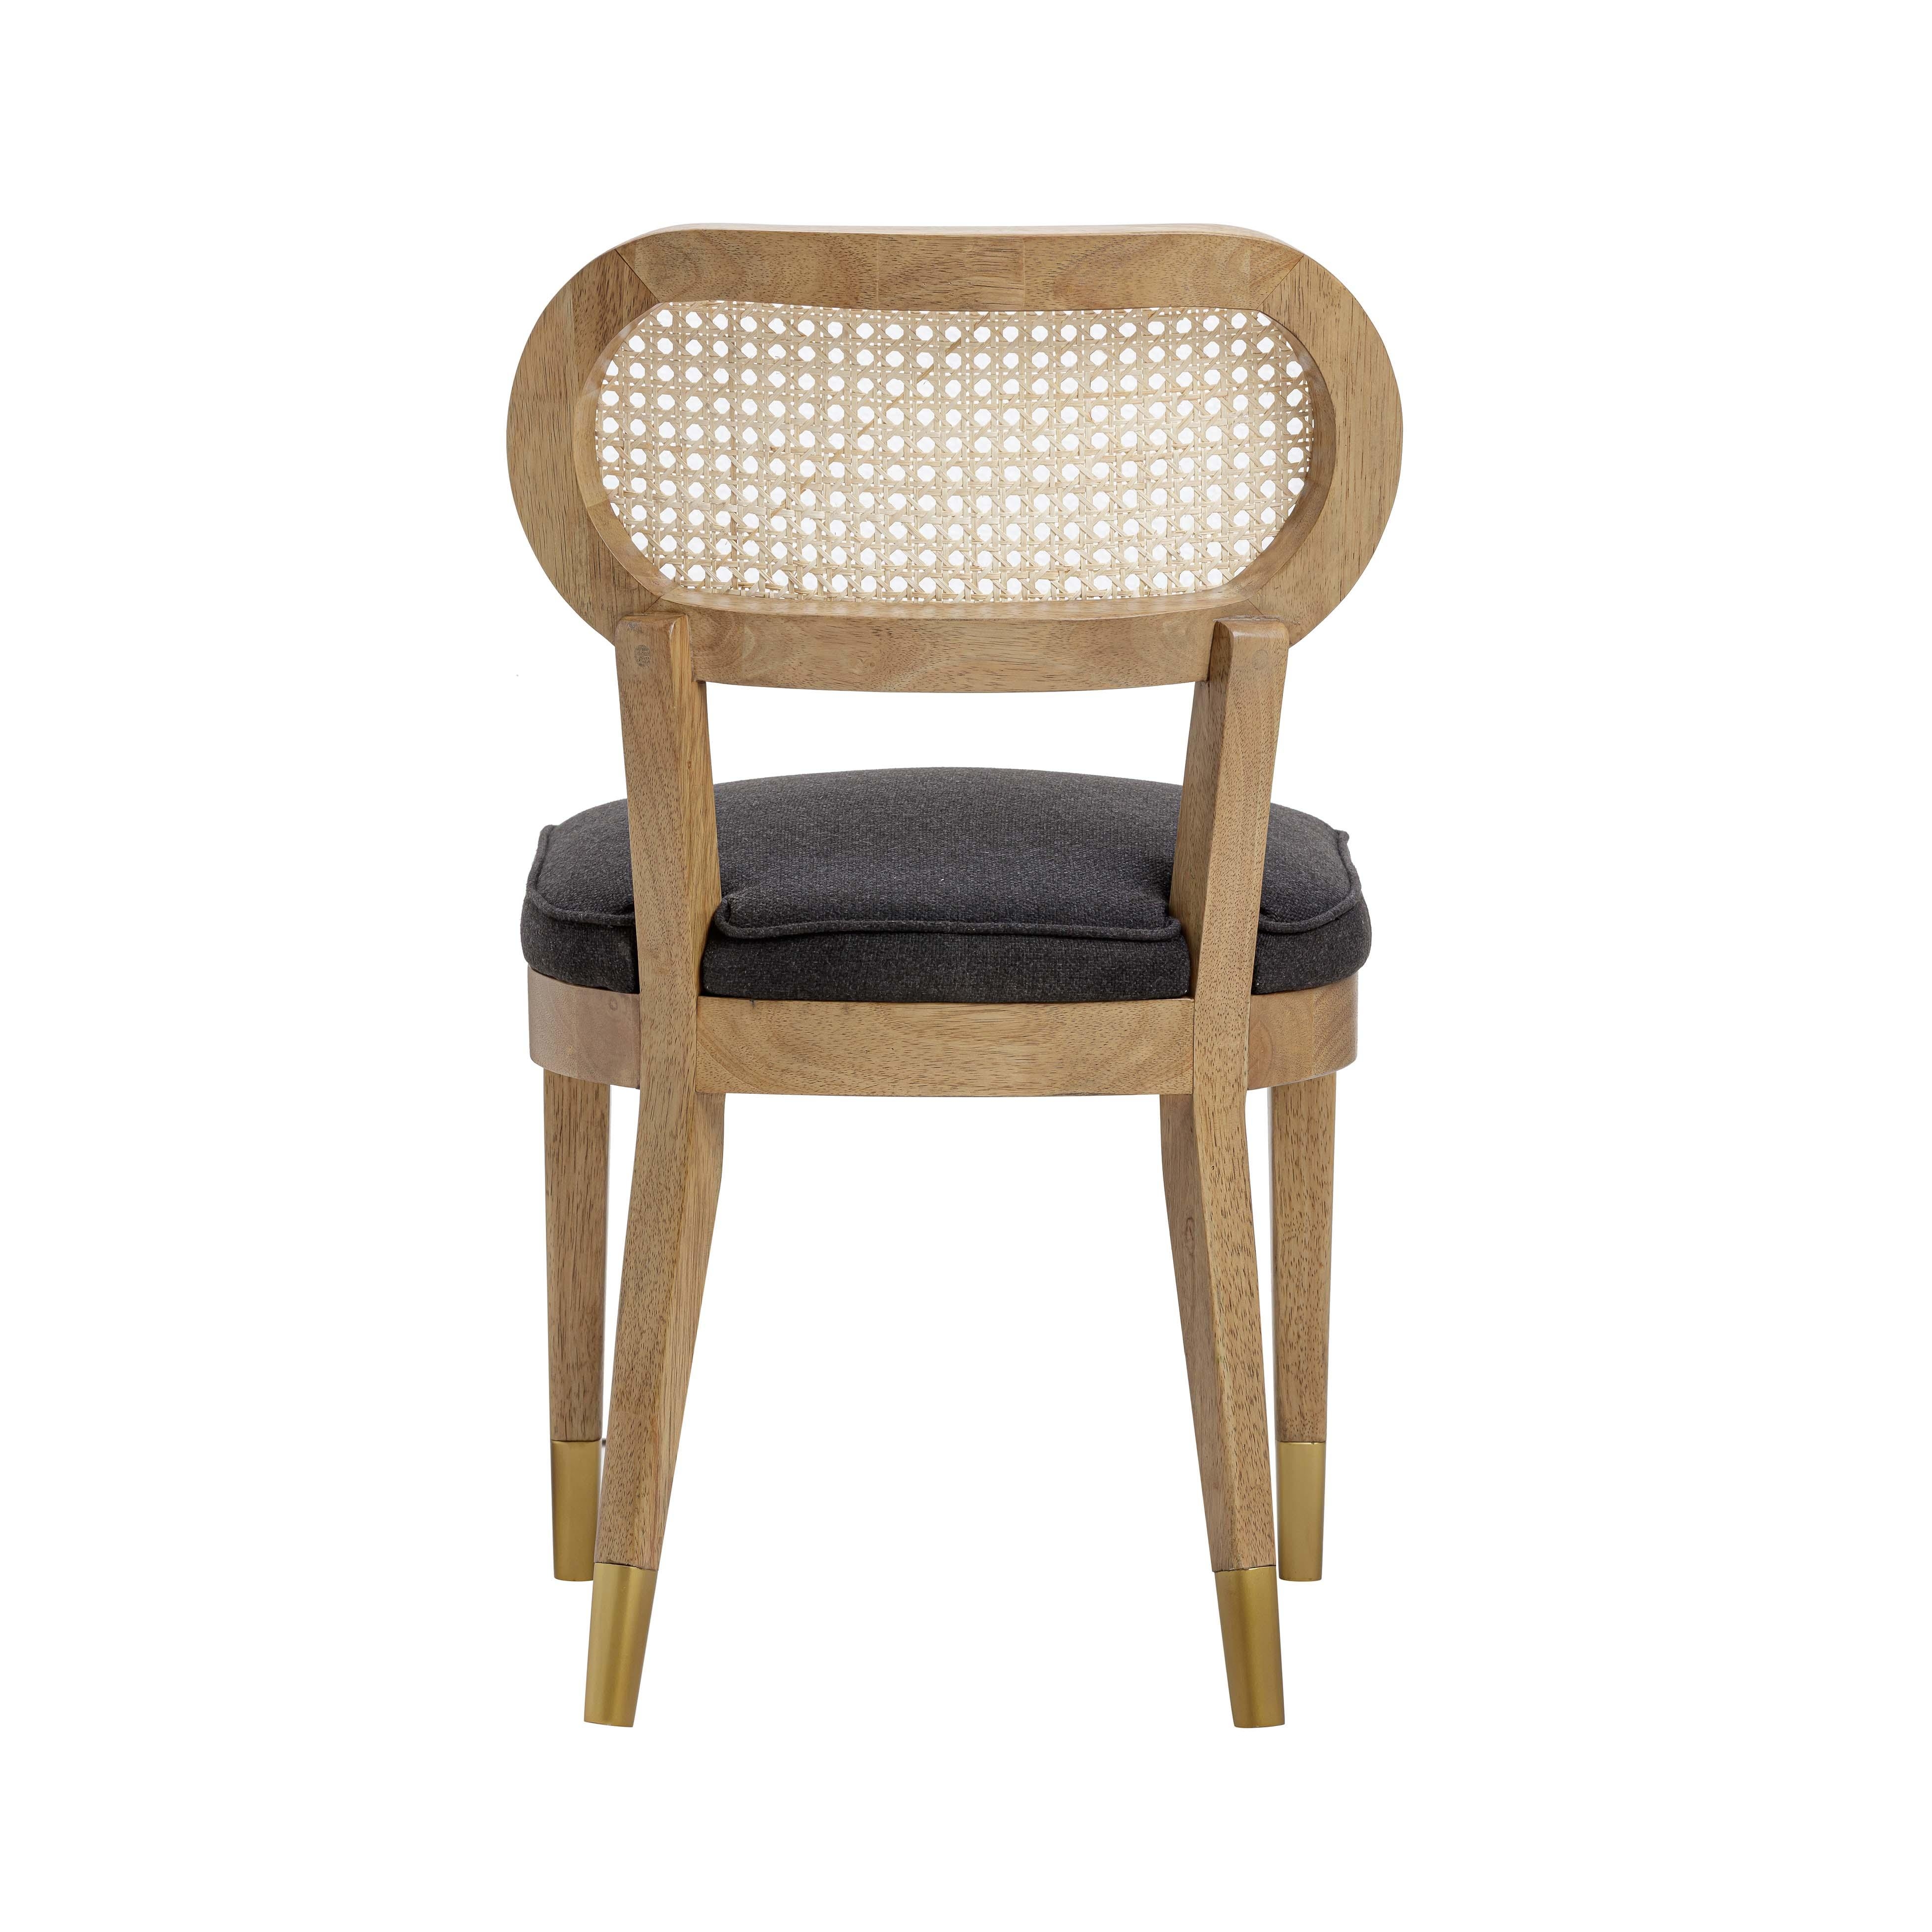 Cosette Black Dining Chair - Image 2